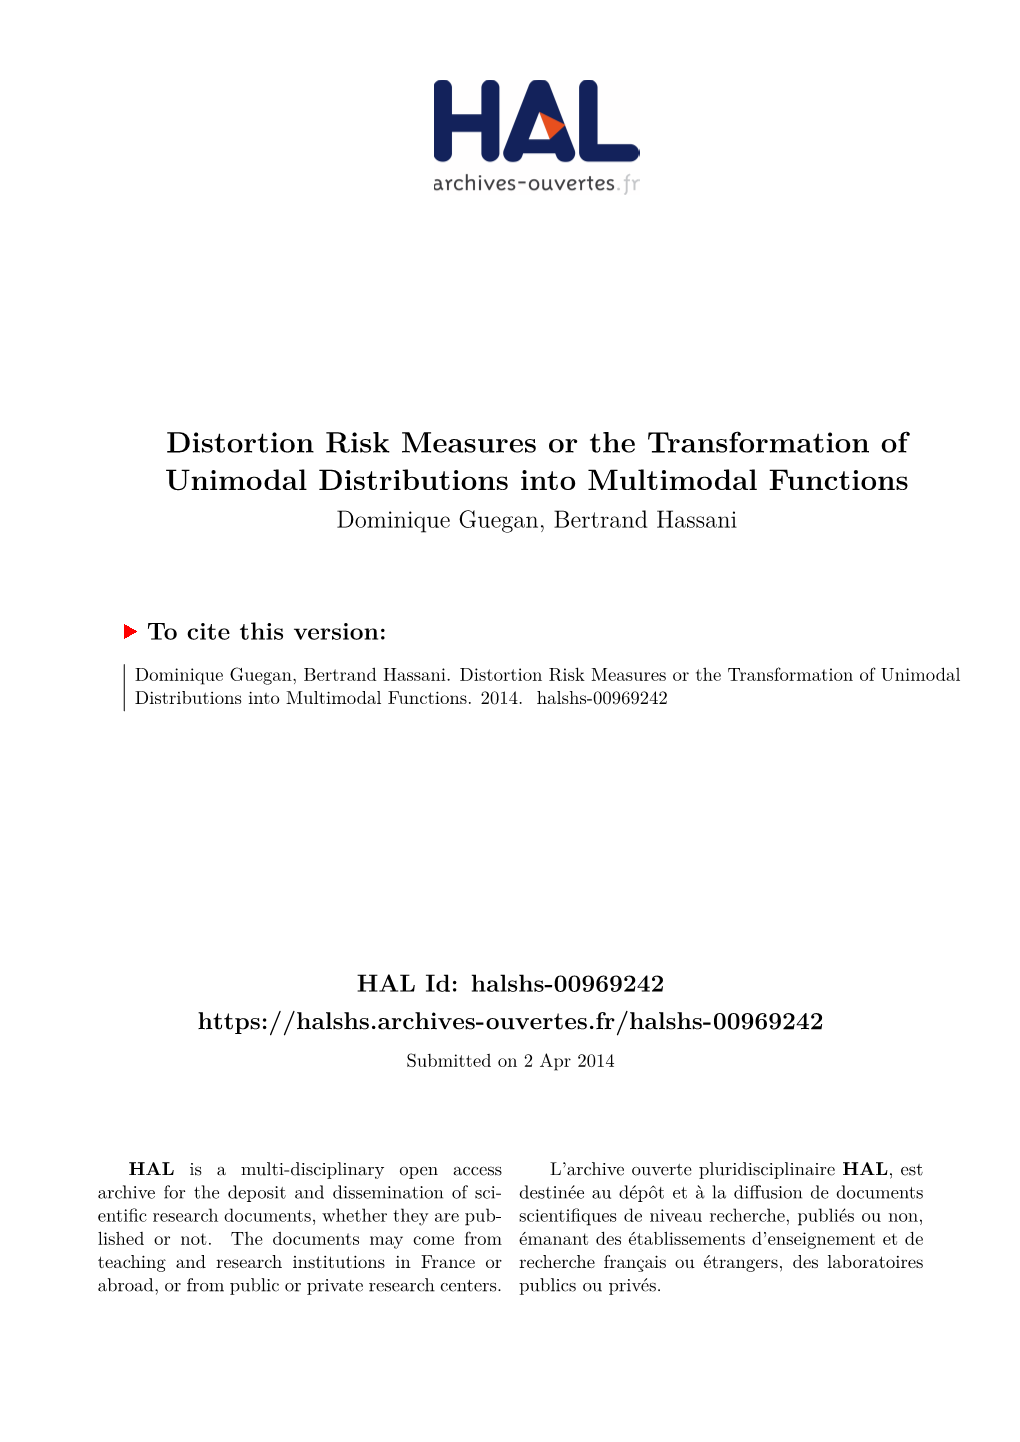 Distortion Risk Measures Or the Transformation of Unimodal Distributions Into Multimodal Functions Dominique Guegan, Bertrand Hassani